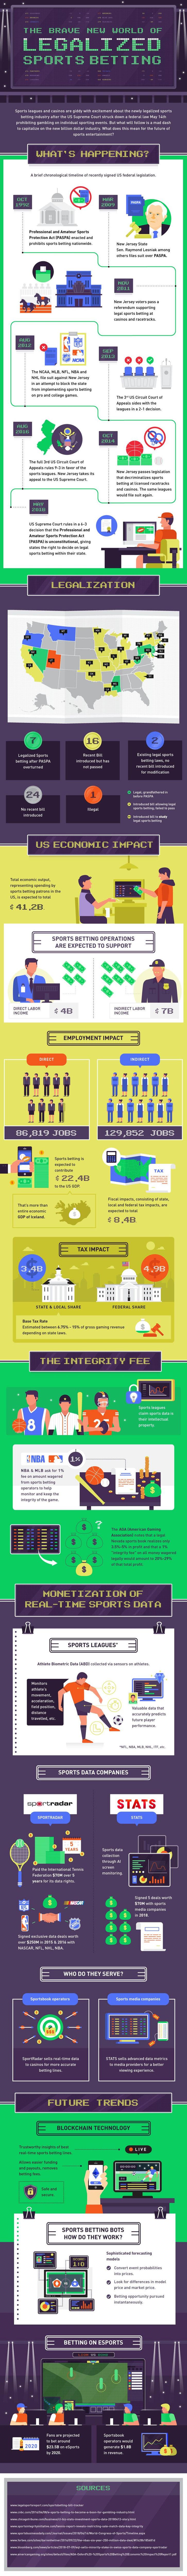 Legalized Sports Betting Infographic